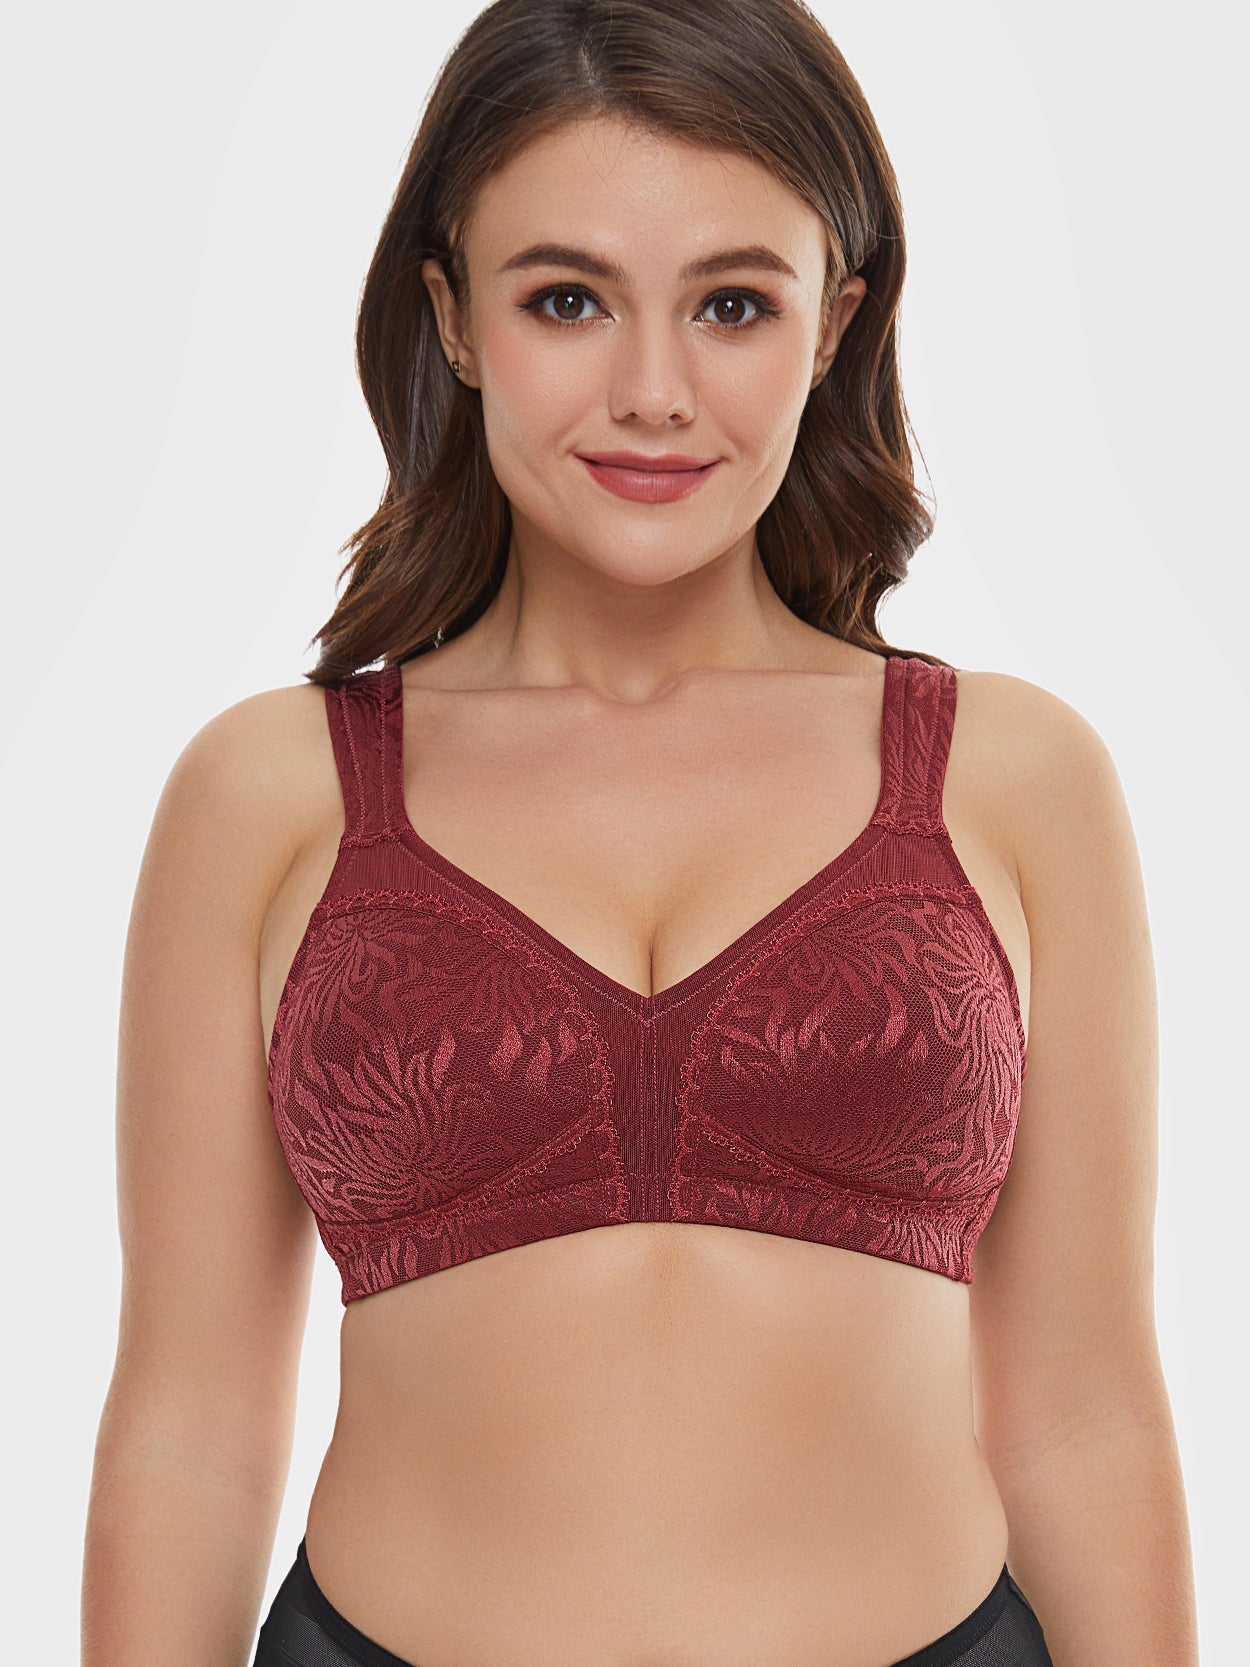 Wingslove Women's Minimizer Full Coverage Wirefree Bra For Bigger Size